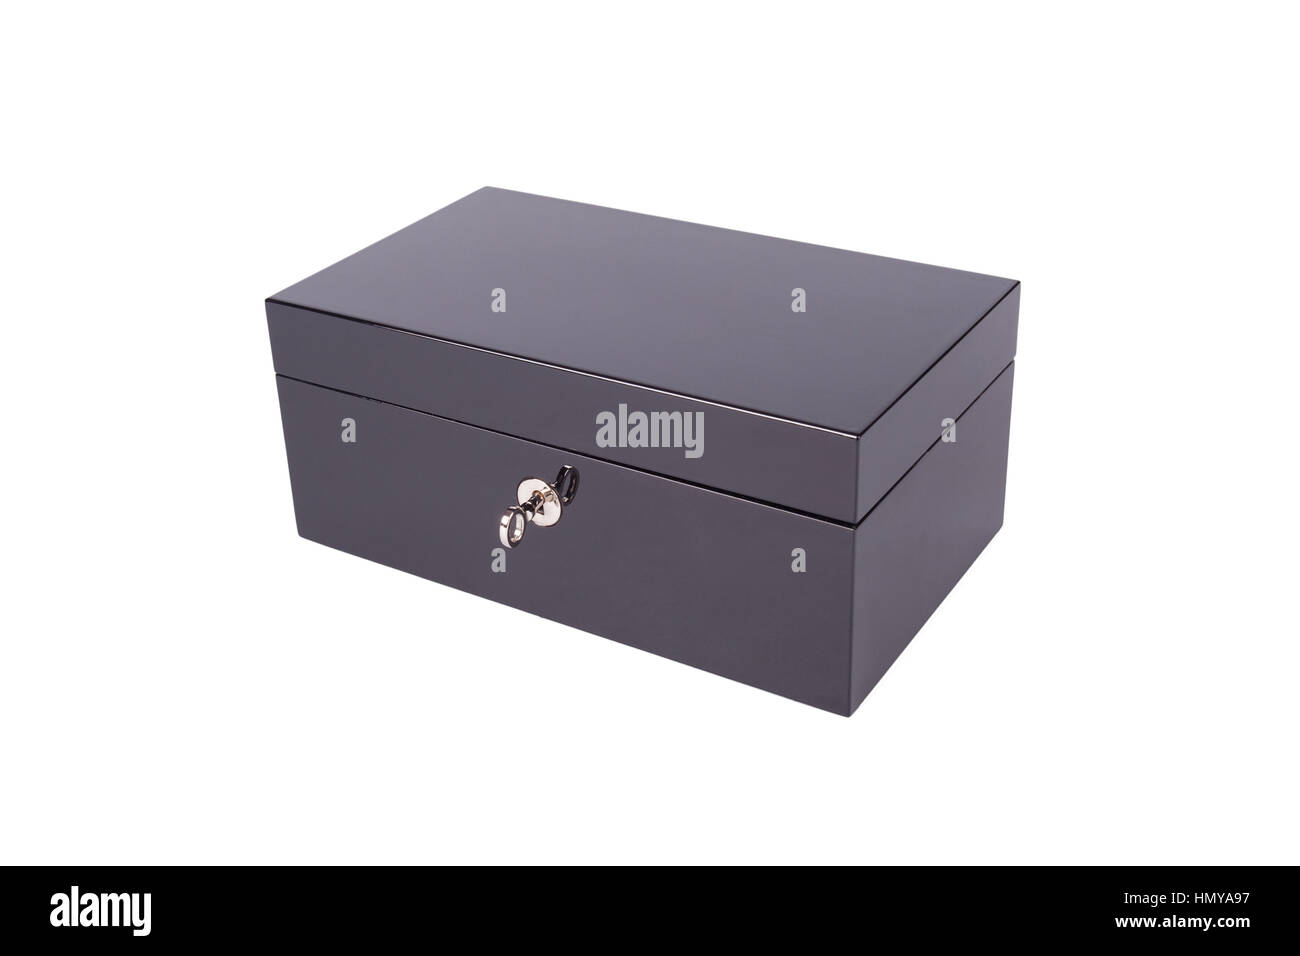 The black box is a locked on a white background Stock Photo